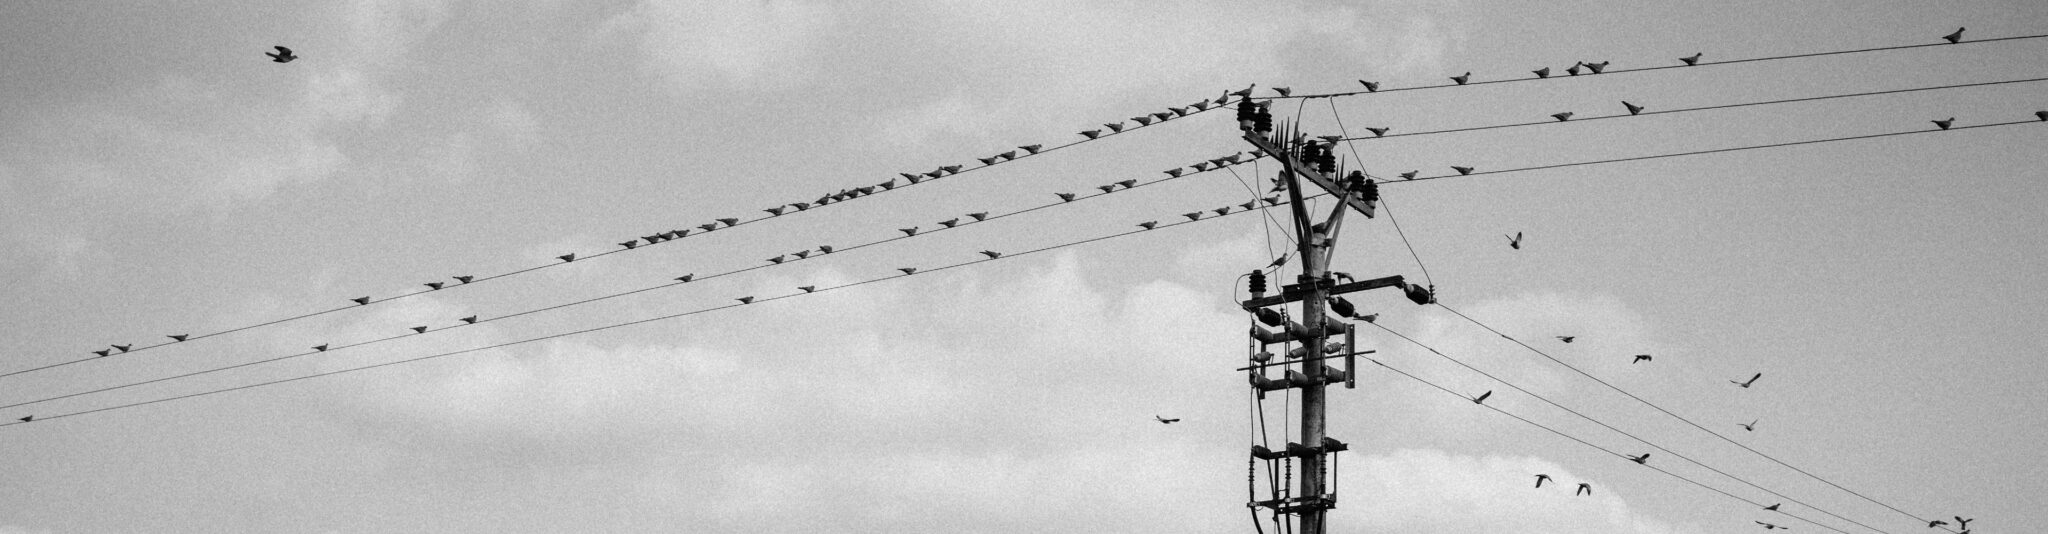 Image is a black and white photograph of telephone wires with a flock of birds seated on the wires.